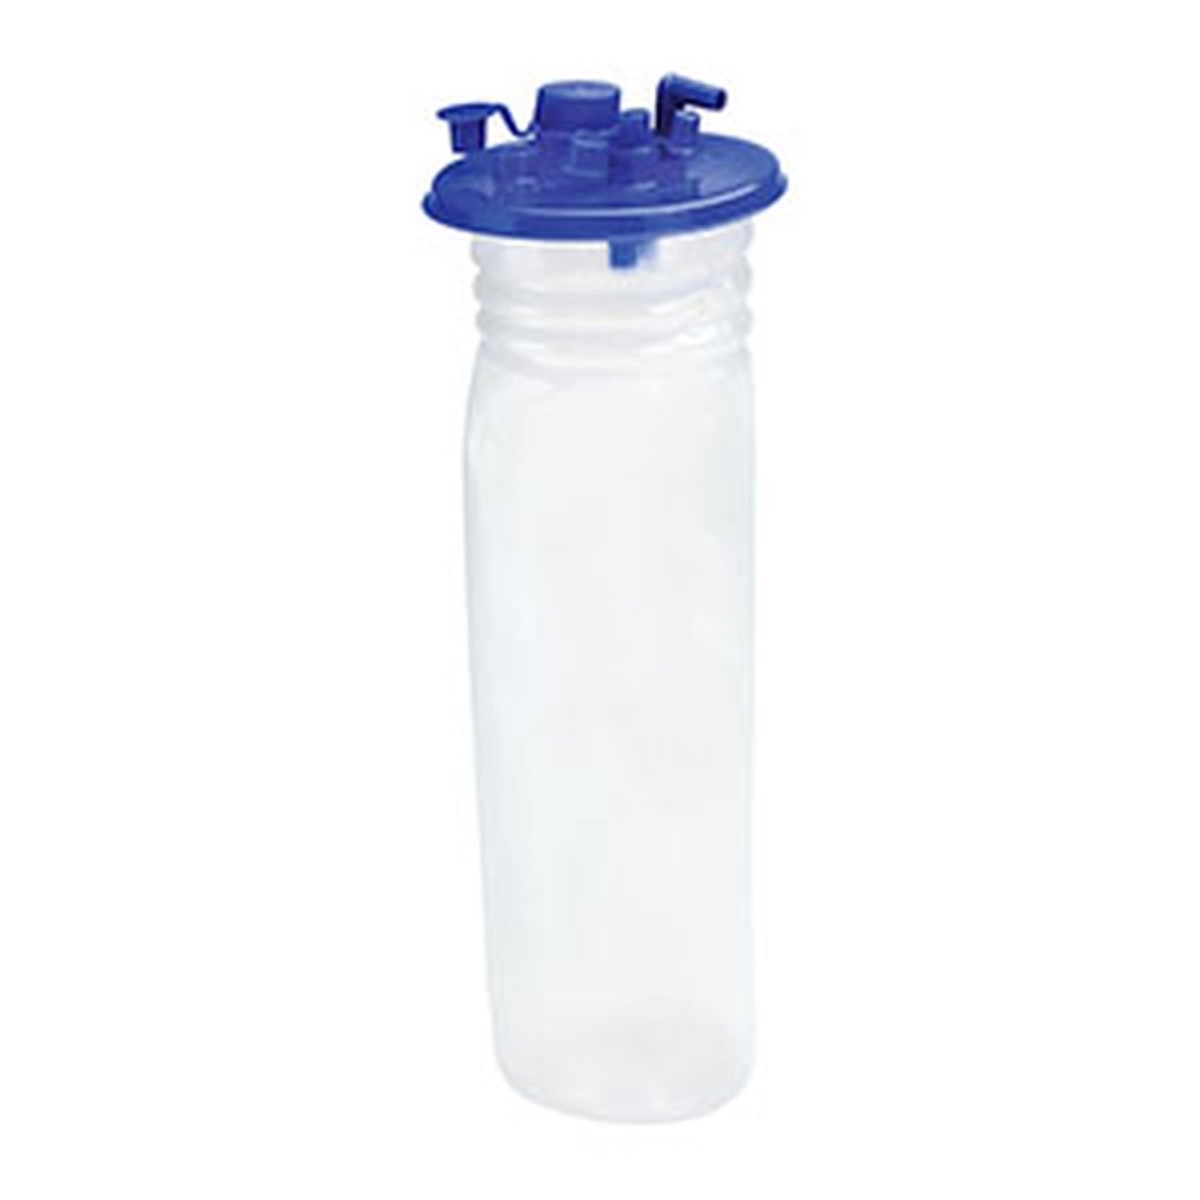 Picture of Cardinal 274618-EA 3000 ml Flex Advantage Suction Canister Liner - Pack of 50